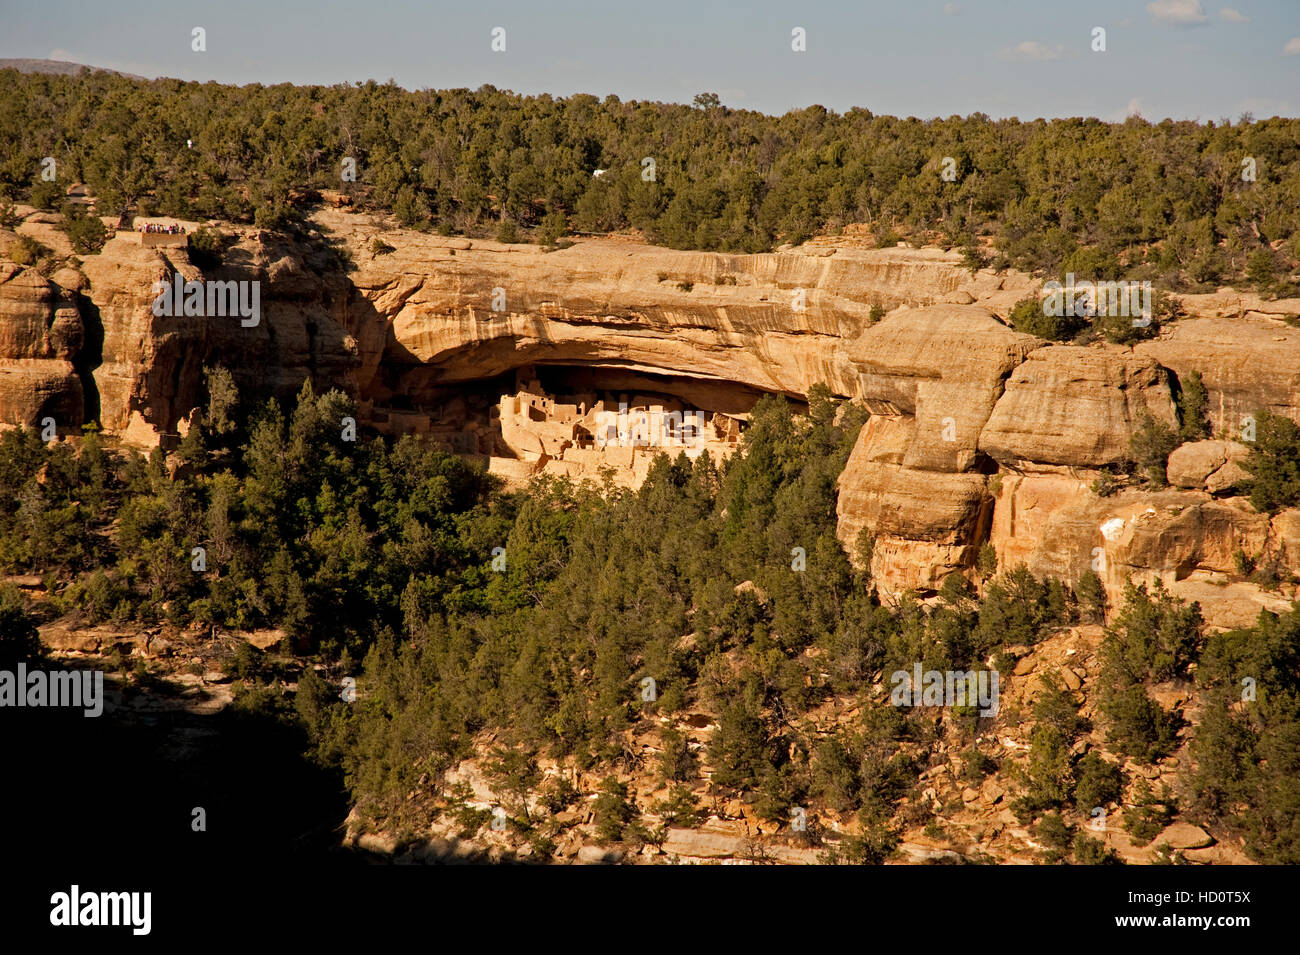 Cliff Palace Mesa Verde from across a canyon showing the structure recessed in the cliff face.  Foligae of green evergreen trees Stock Photo